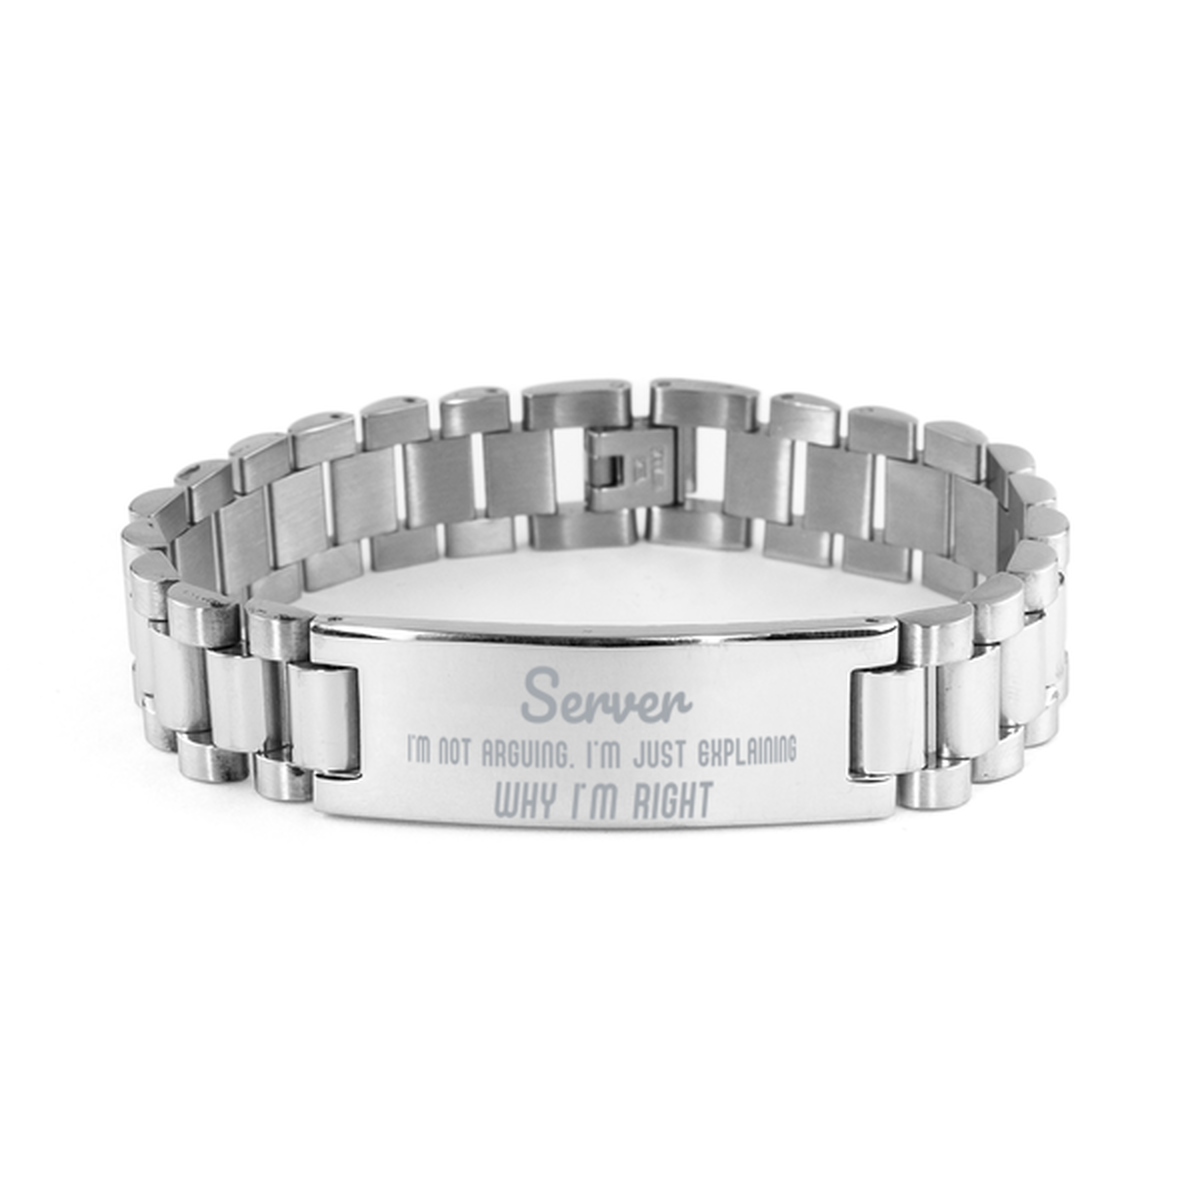 Server I'm not Arguing. I'm Just Explaining Why I'm RIGHT Ladder Stainless Steel Bracelet, Graduation Birthday Christmas Server Gifts For Server Funny Saying Quote Present for Men Women Coworker